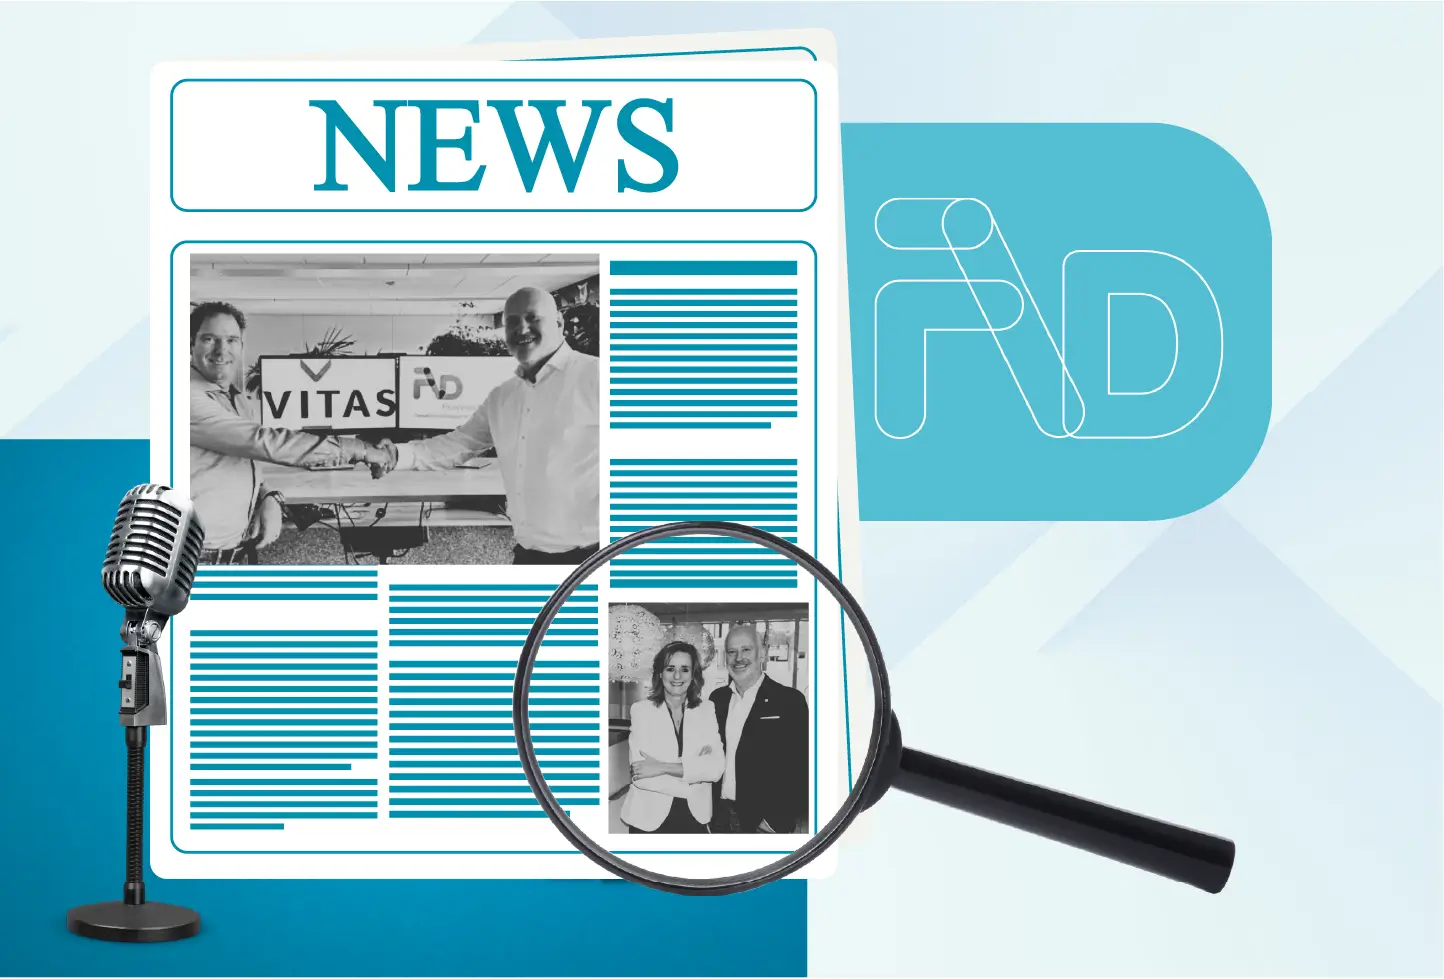 Vintage style newspaper layout with 'NEWS' headline featuring a black and white image of scientists, representing FlowView Diagnostics rich history and latest news updates in medical research advancements.